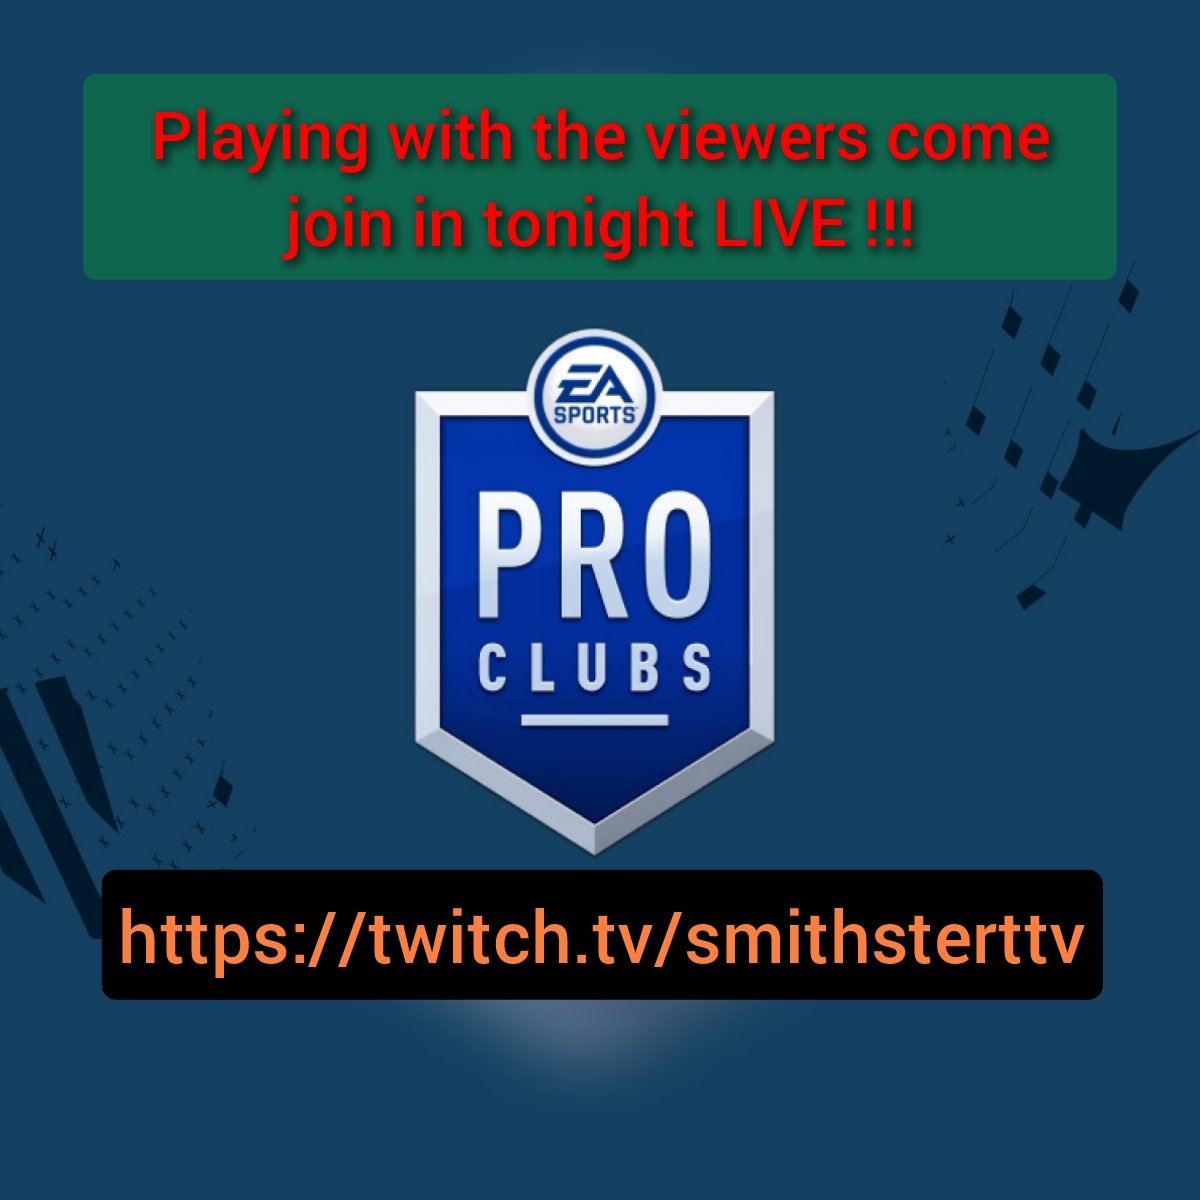 PRO CLUBS playing with the viewers come join in team name SmithsterTTV V2 on Xbox series X/S
twitch.tv/smithsterttv
 discord.gg/T8K3BapPYx
#giveaway #fyp #foryourpage #playingwithviewers #xboxseriesx #ps5 #pc #football #proclubs #sunday #weekend #mancity #harrykane #Benzema